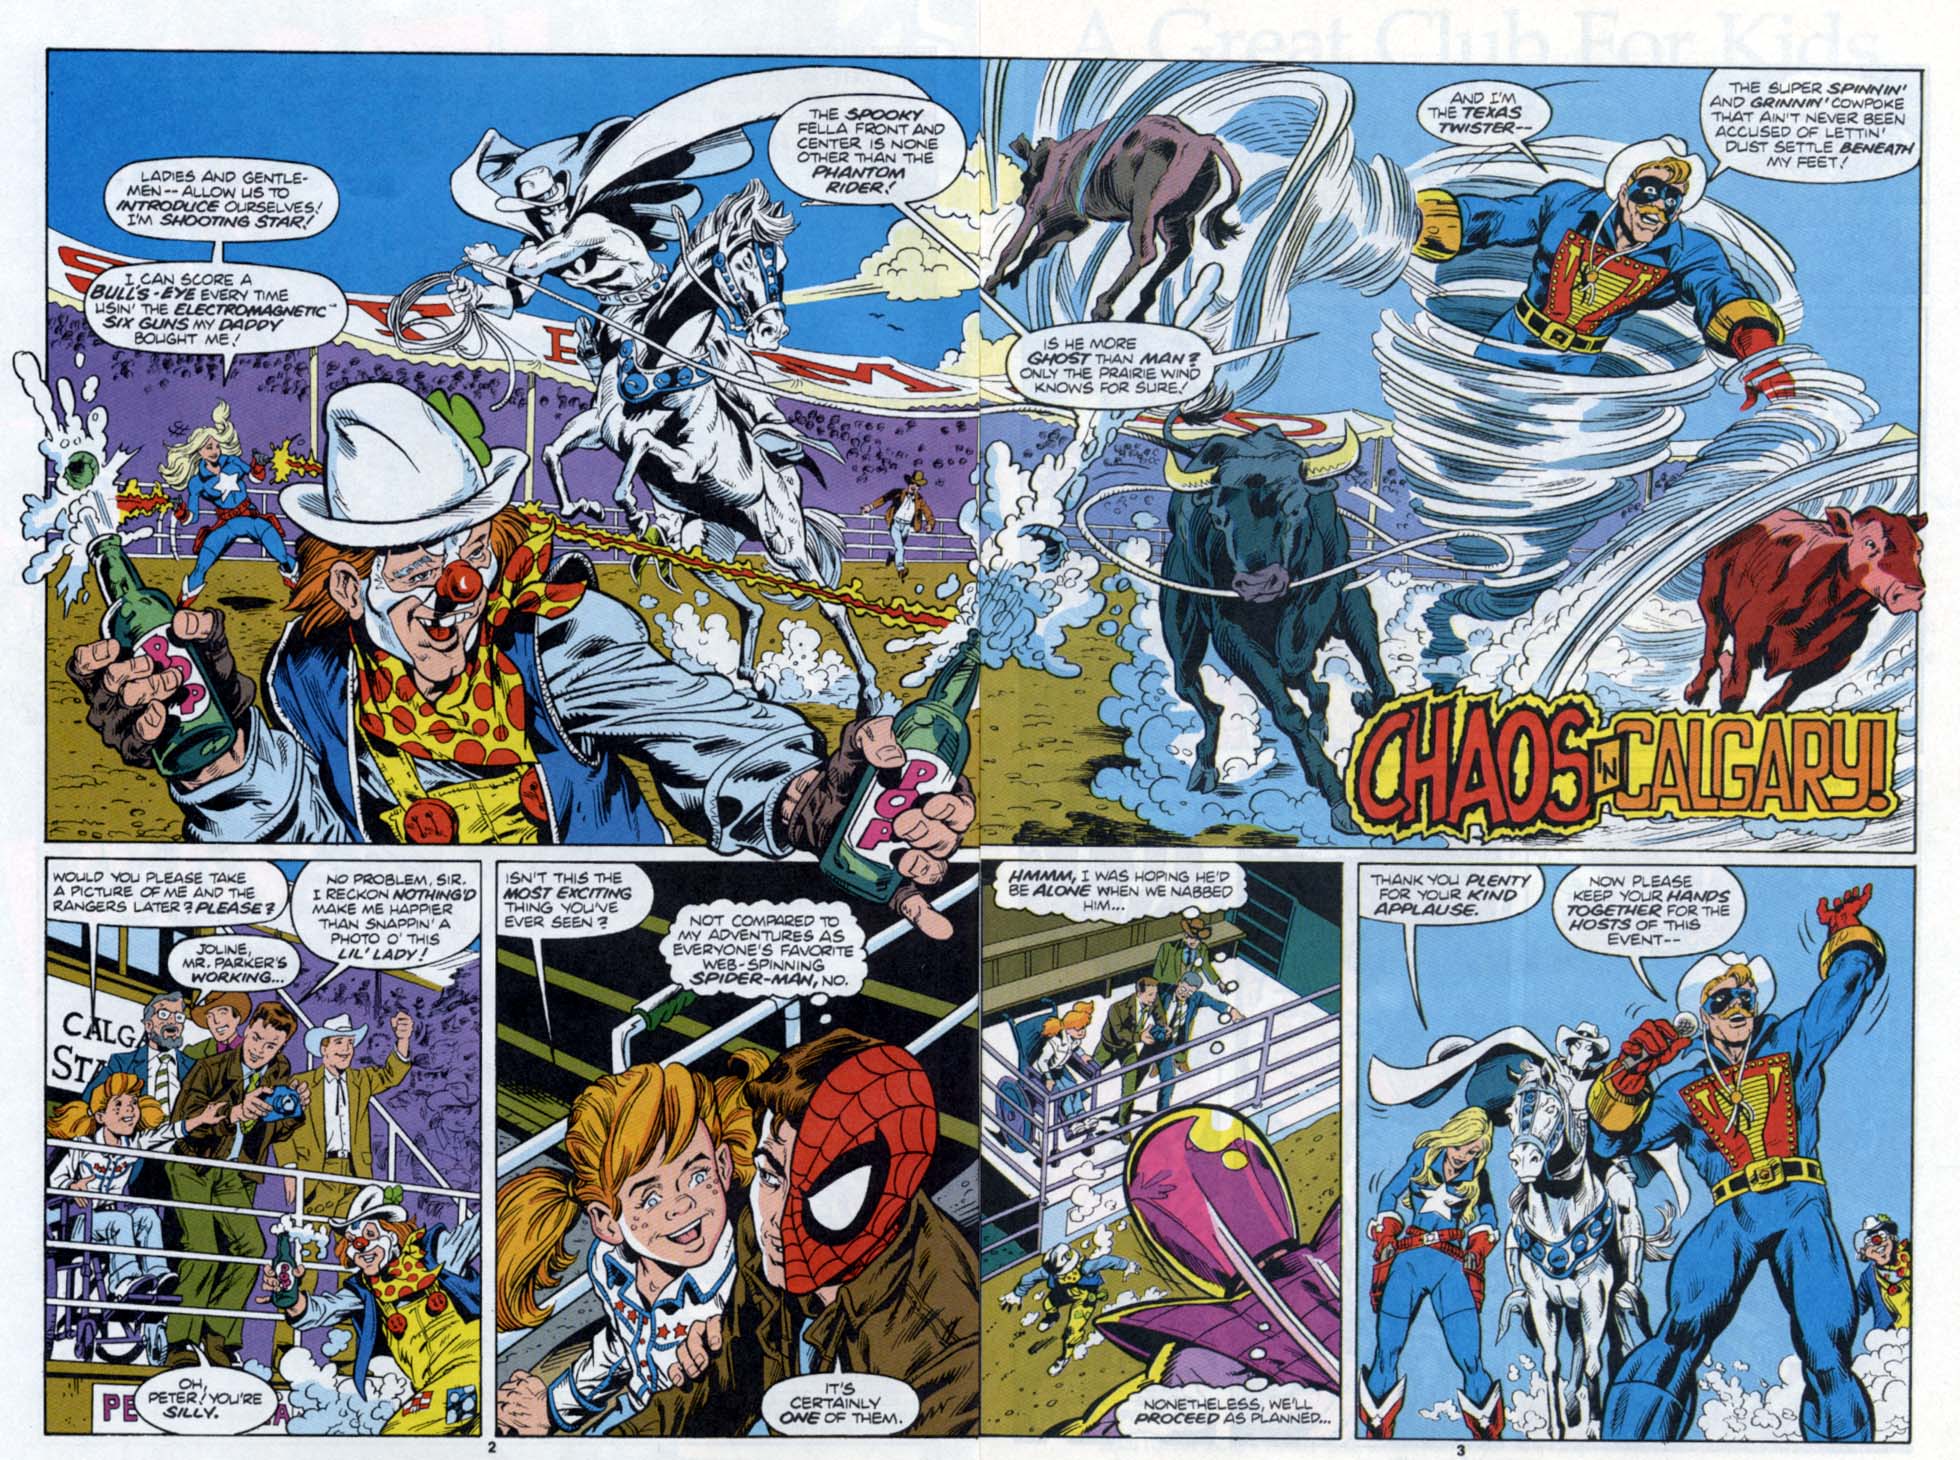 Read online The Amazing Spider-Man: Chaos in Calgary comic -  Issue # Full - 3